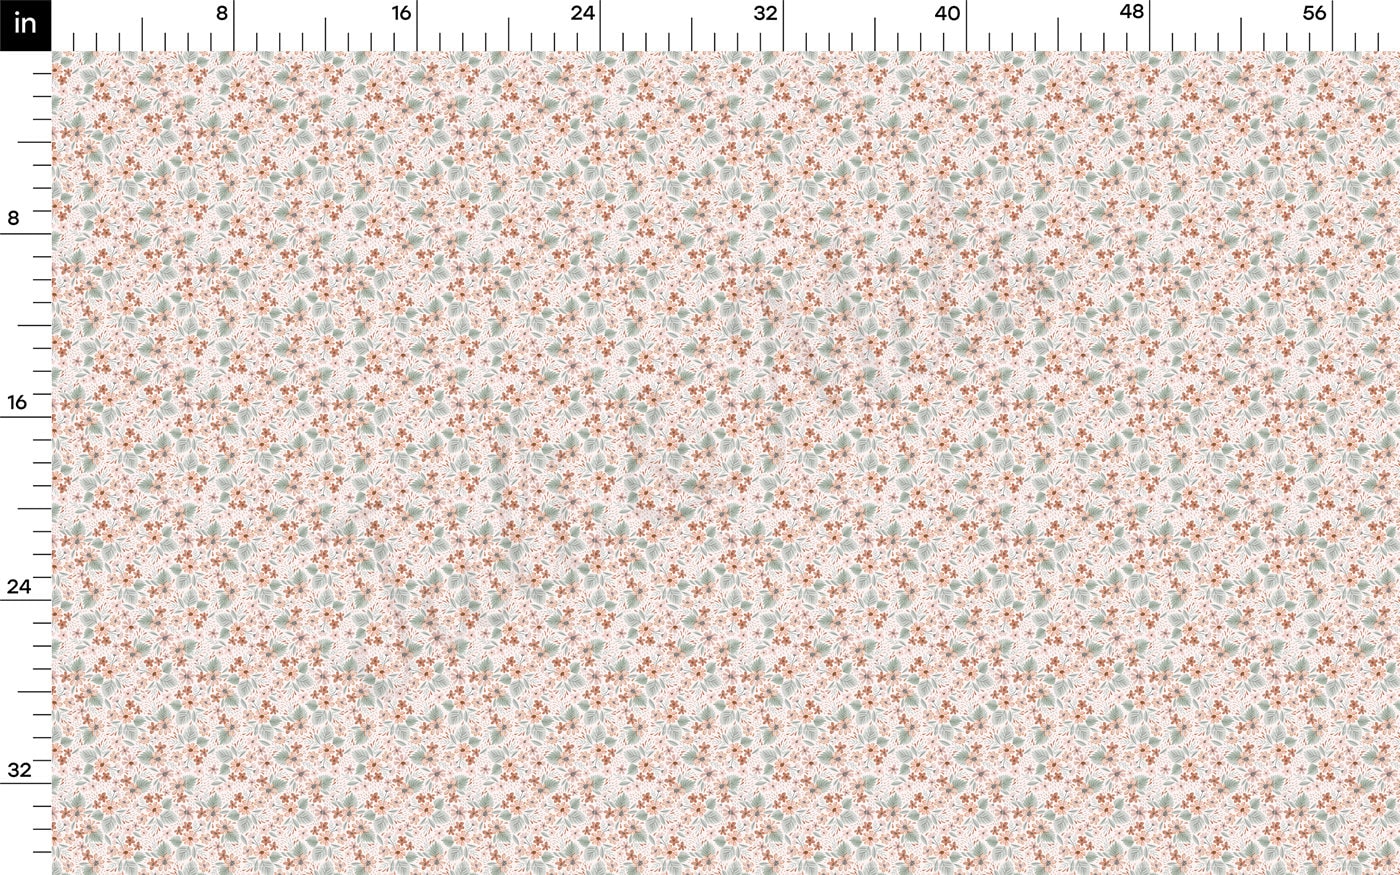 Bullet Fabric AA2425 Floral